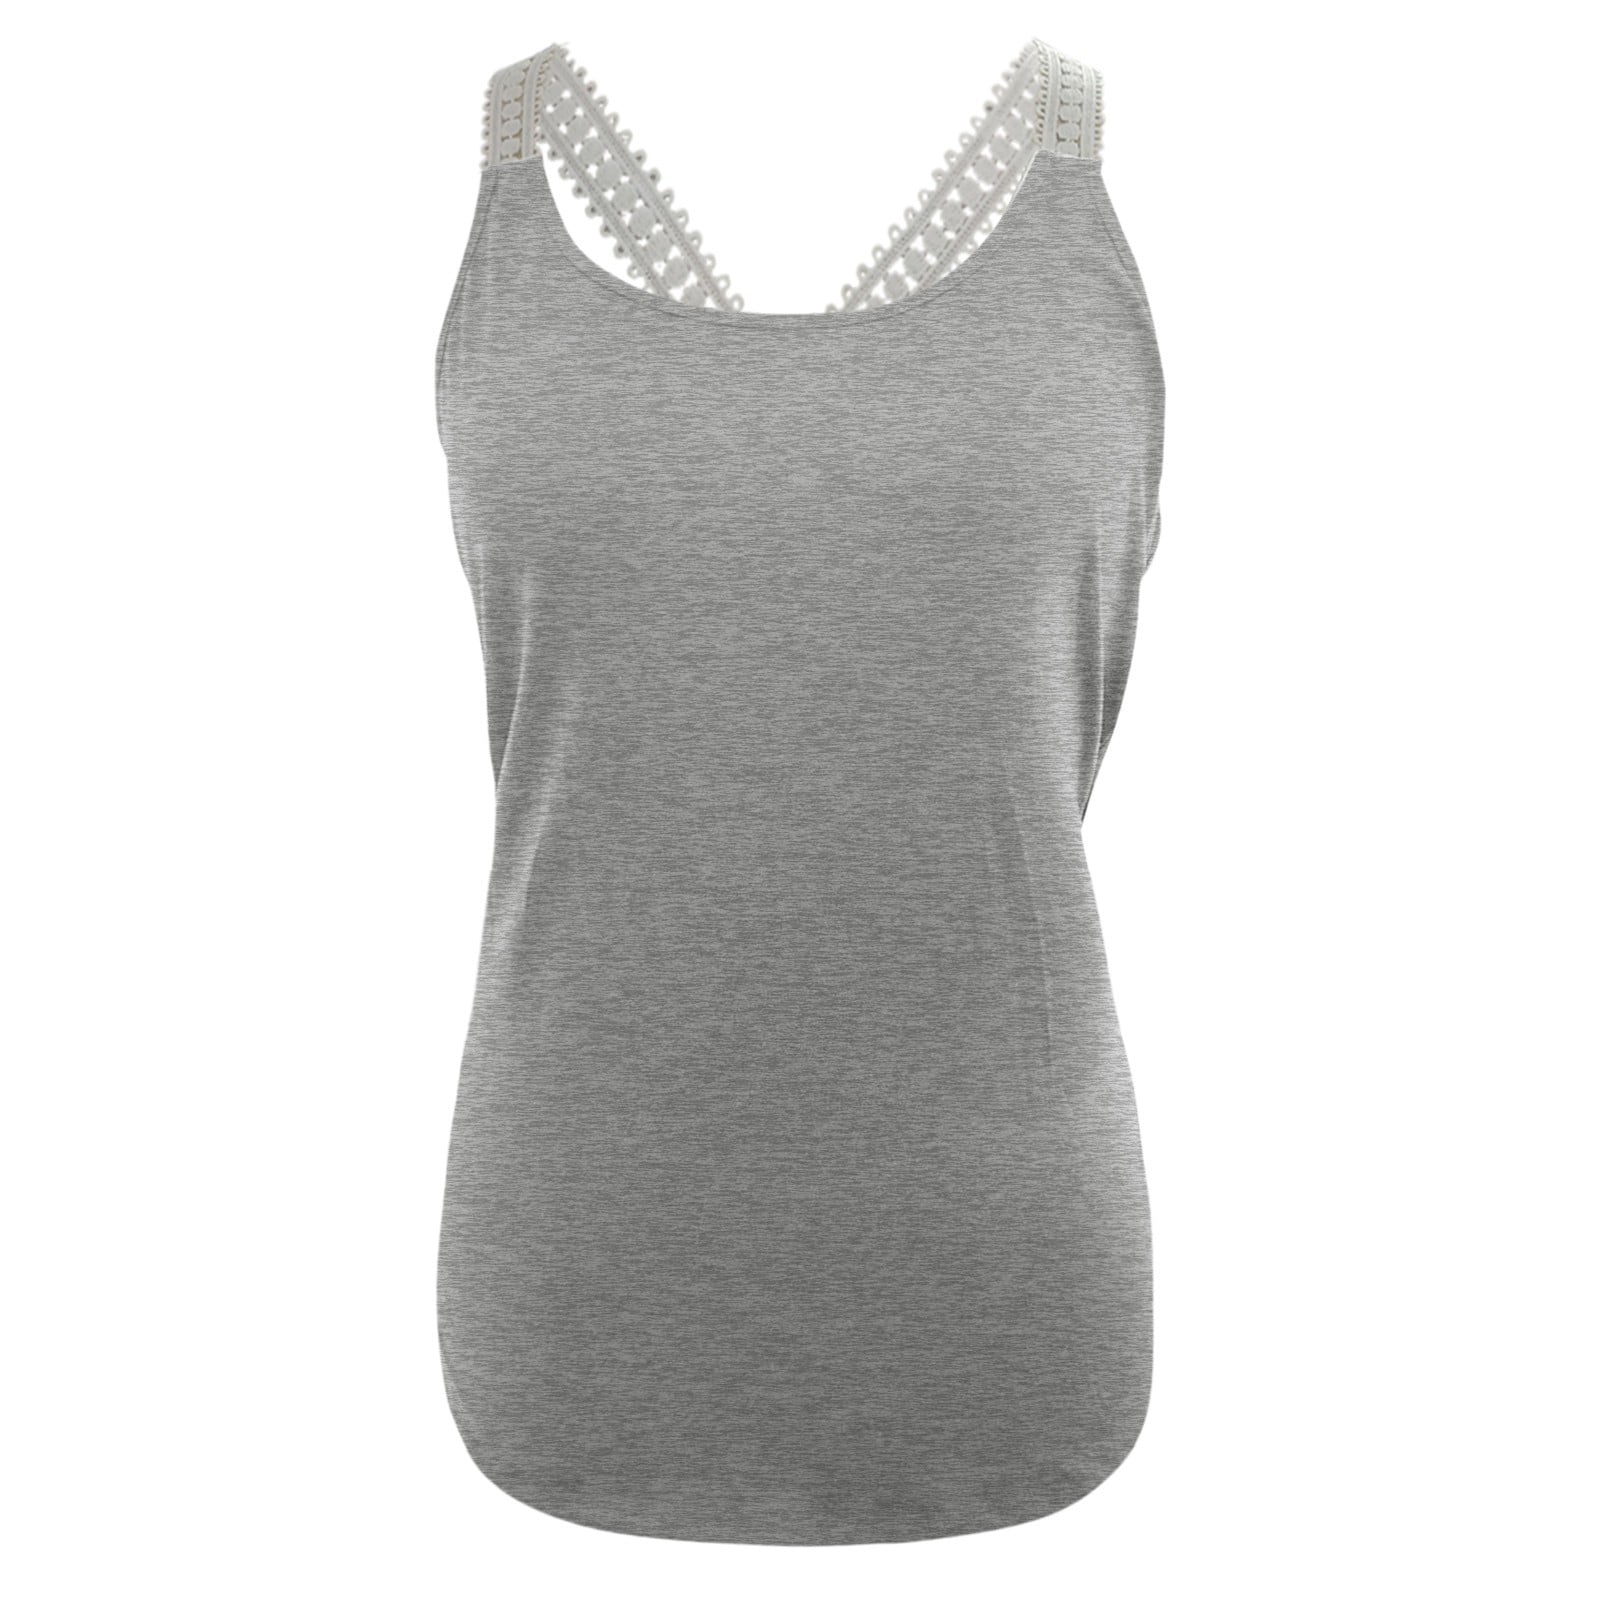 Aayomet Sports Bras Womens Grils Lace Bralettes Workout Tank Tops Yoga Crop  Top Built In Bras Fitness Camisole Shirts Vest,Gray XL 